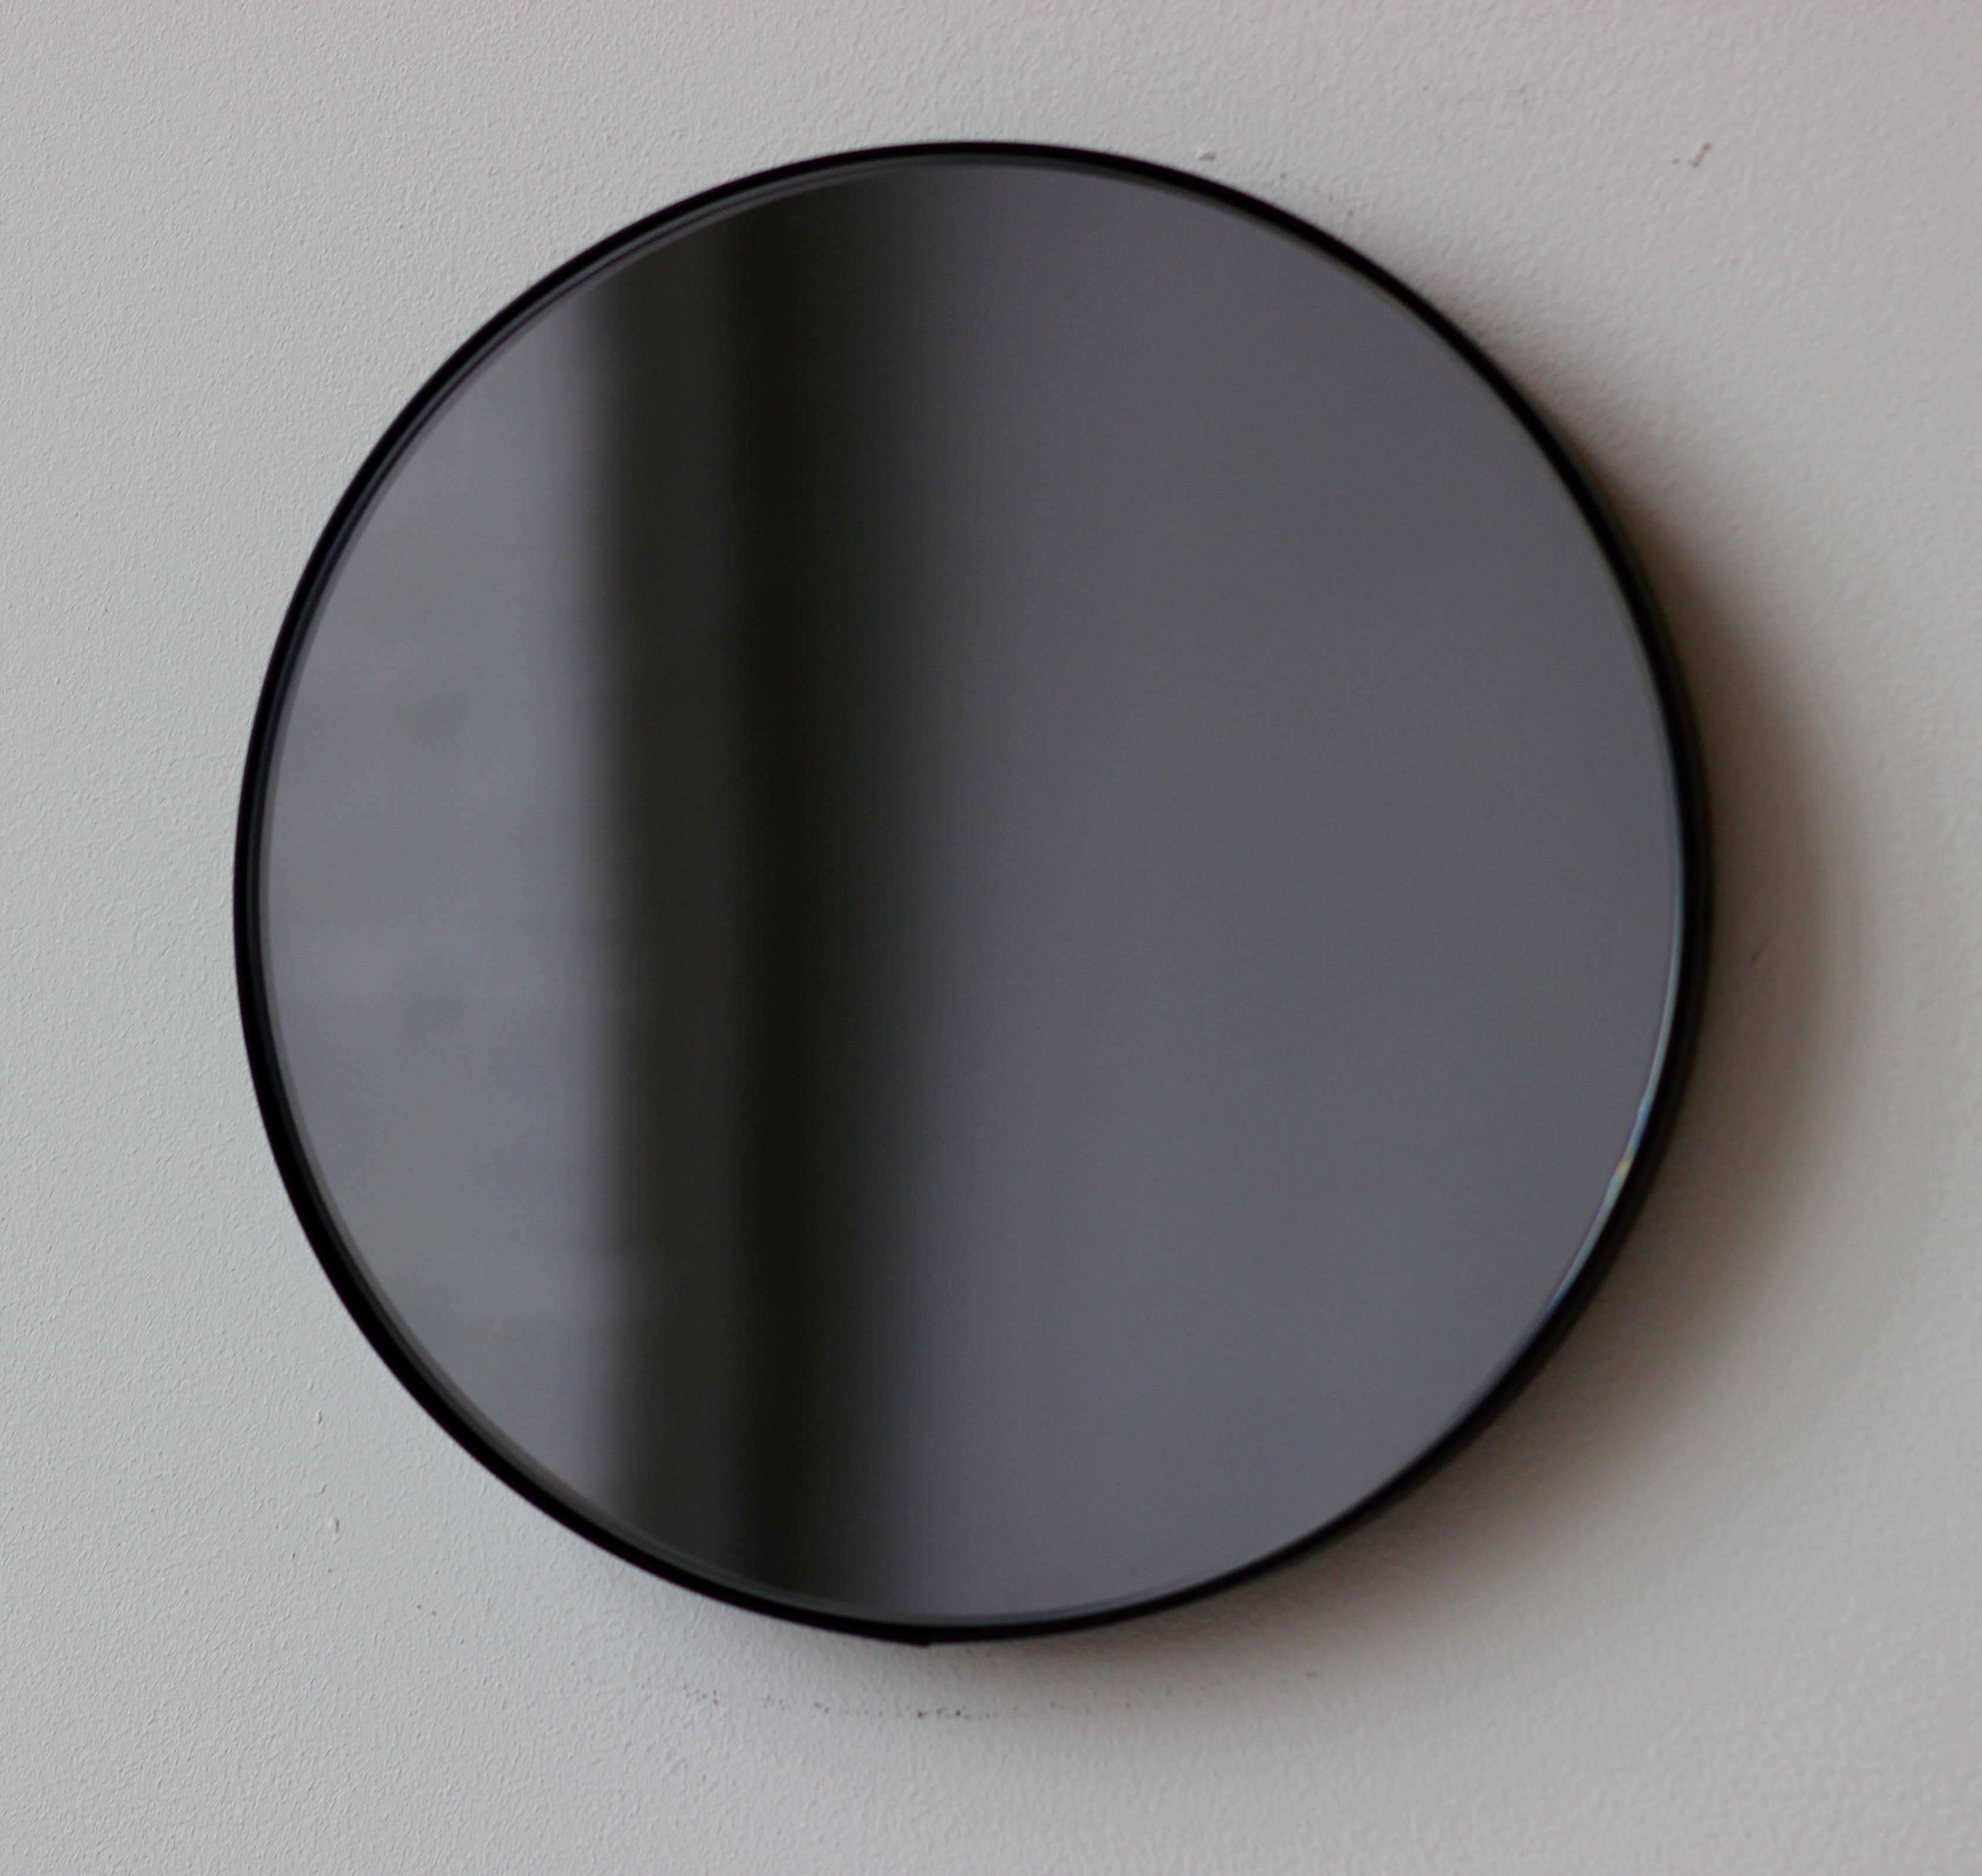 Minimalist black tinted round mirror with an elegant black powder coated aluminium frame. Designed and handcrafted in London, UK.

Medium, large and extra-large mirrors (60, 80 and 100cm) are fitted with an ingenious French cleat (split batten)